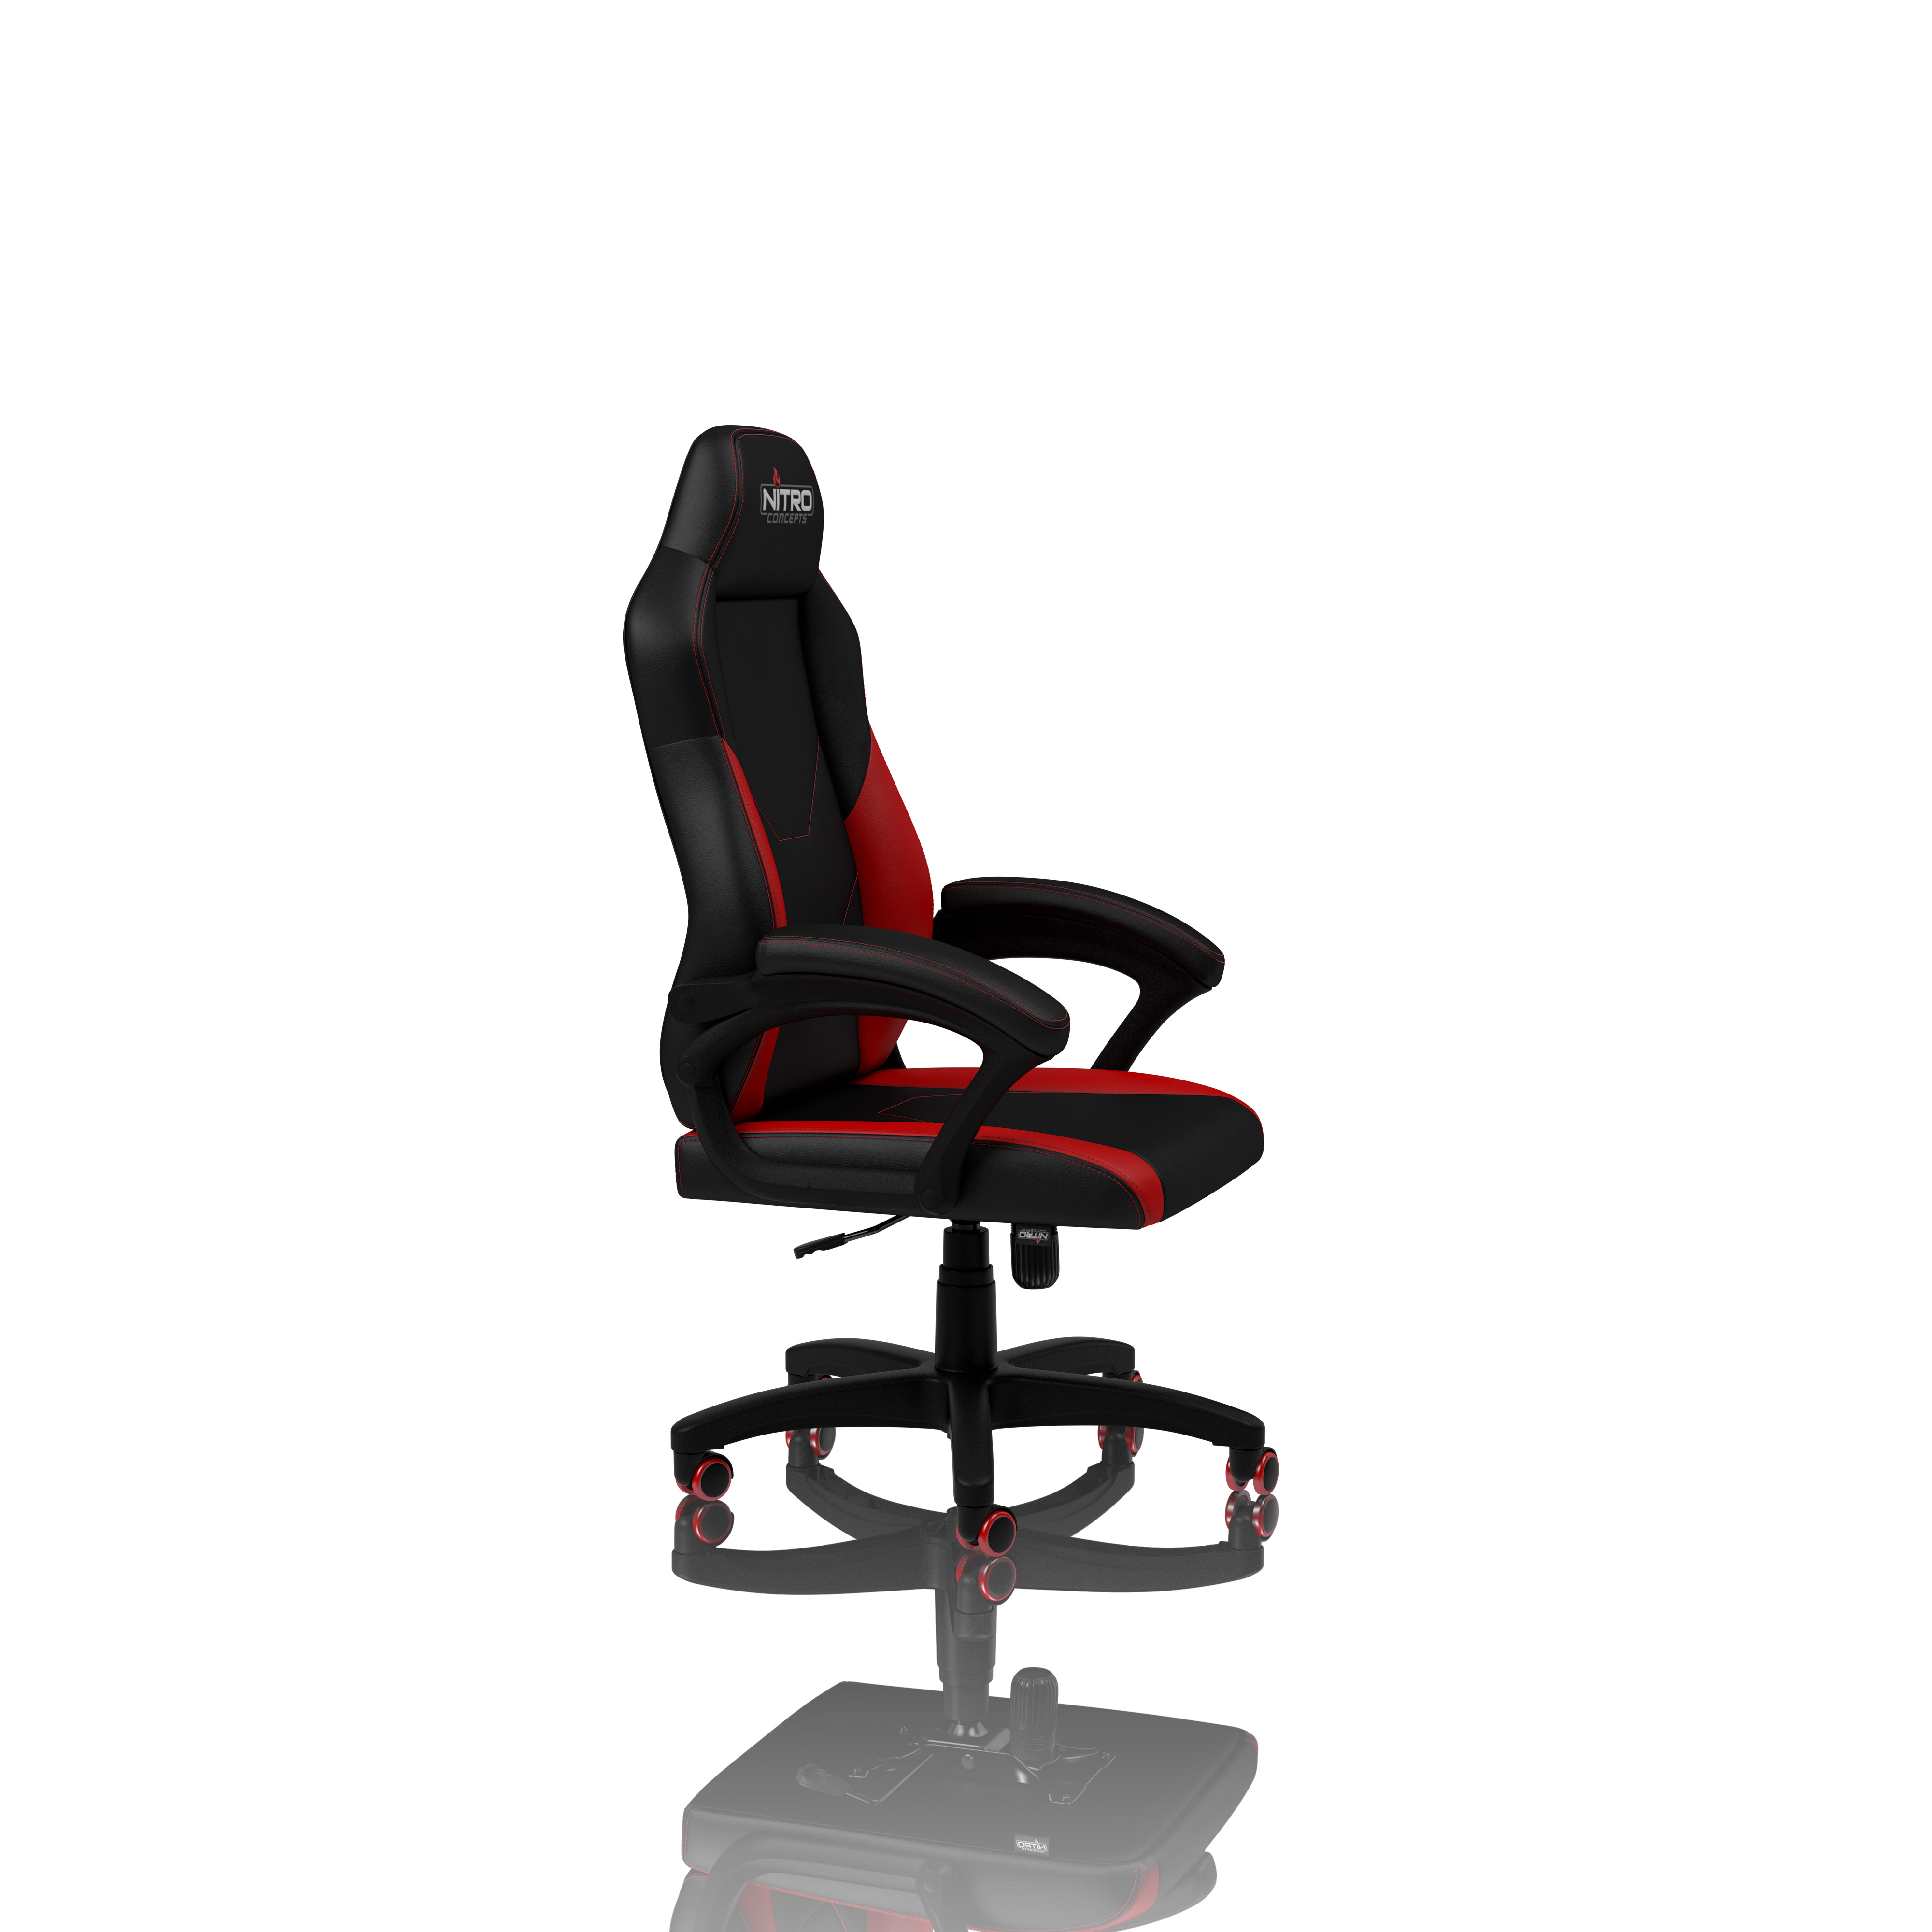 nitro-concepts - C100 Gaming Chair Black/Red